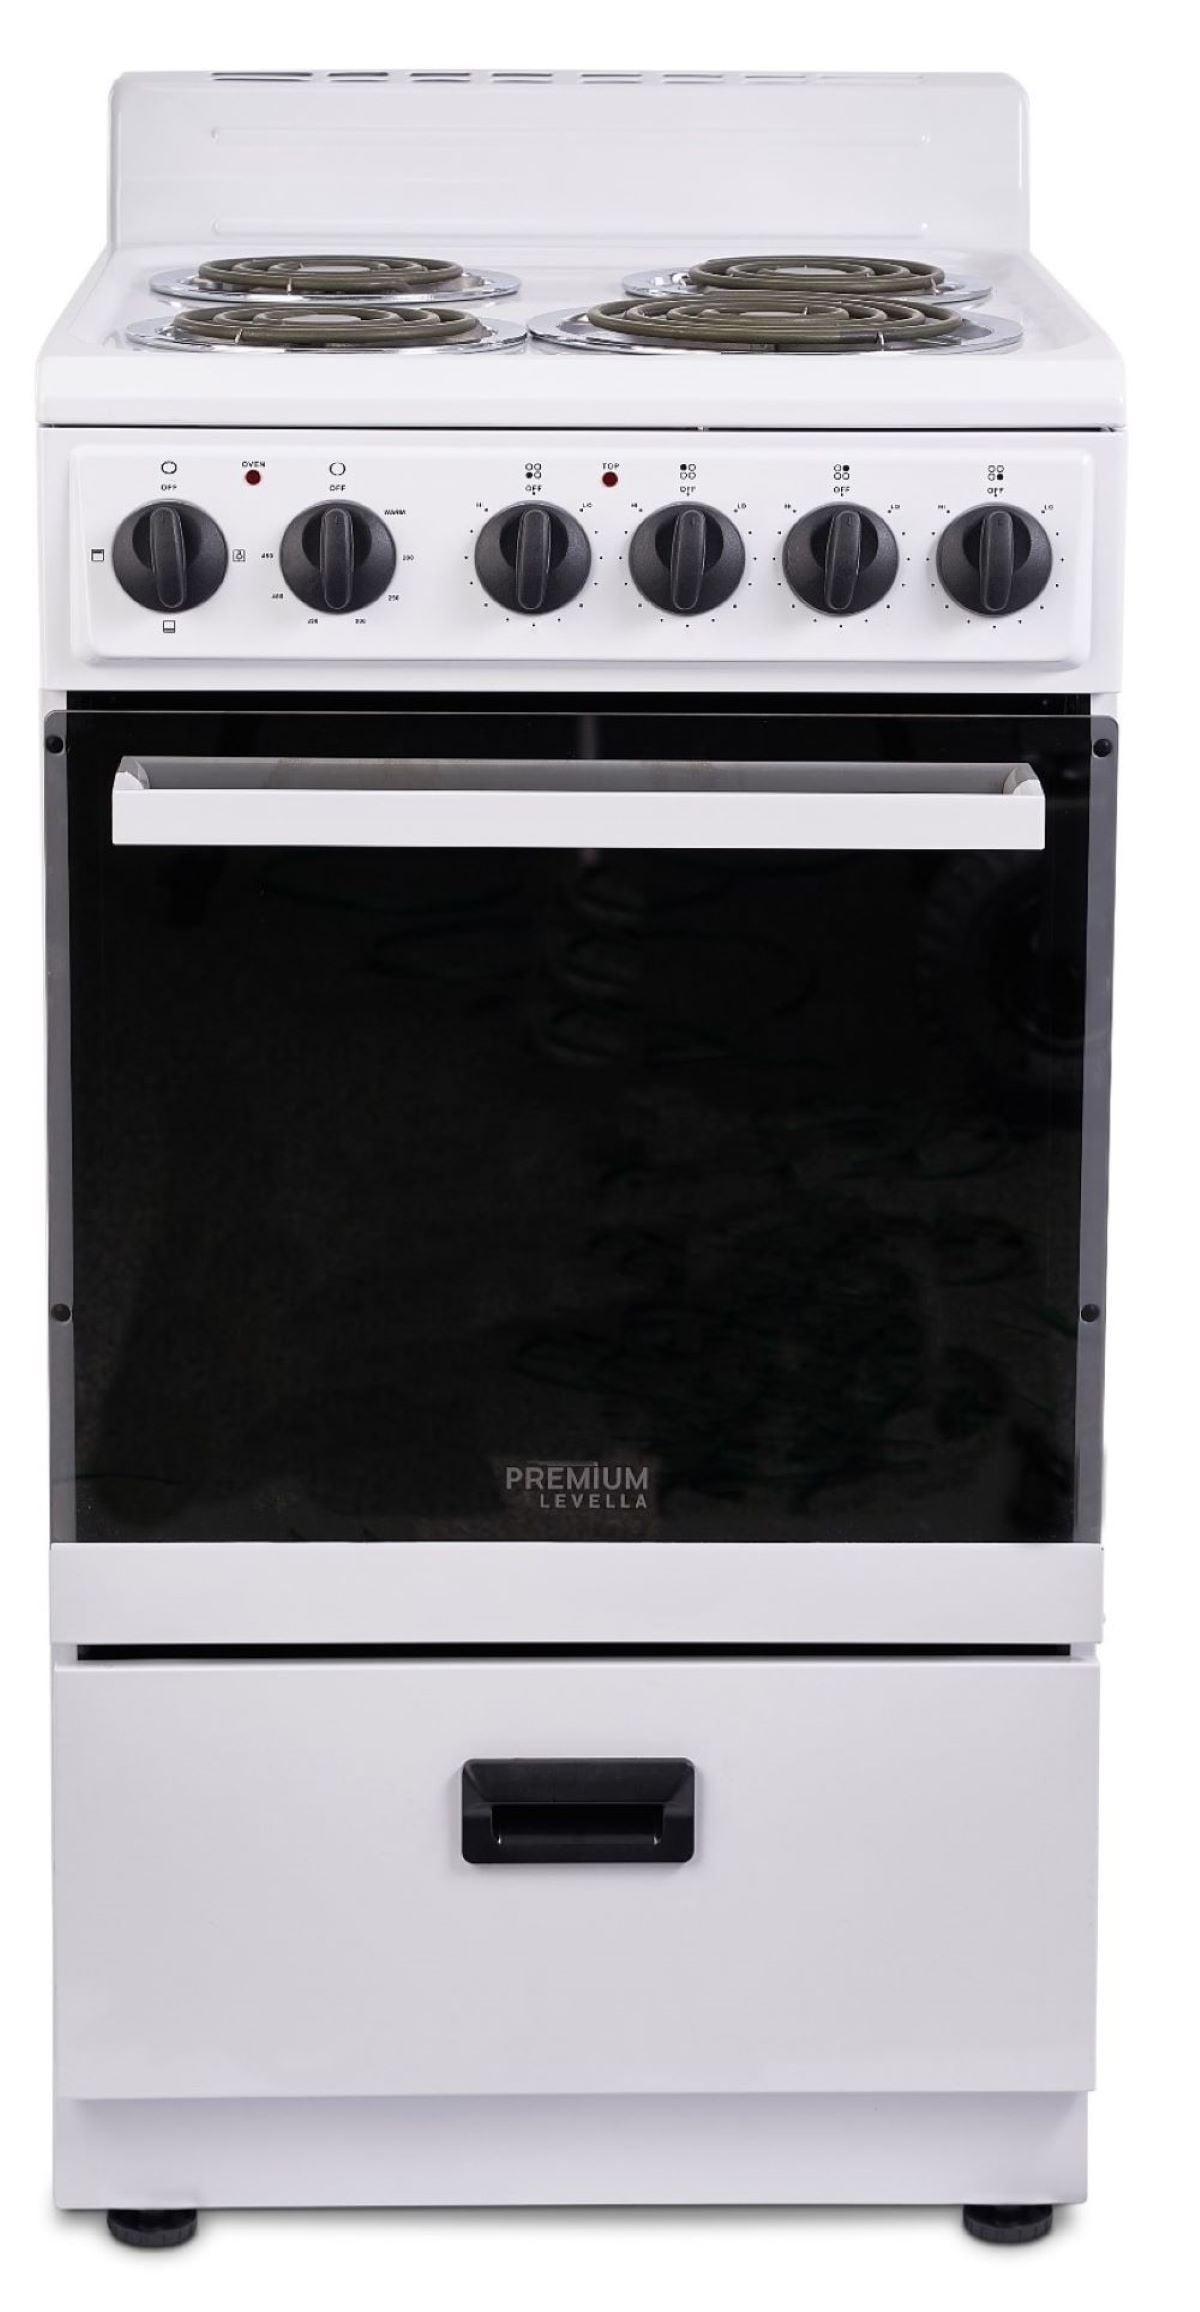 PERFECT FOR TIGHT SPACE DANBY 20 FREESTANDING ELECTRIC RANGE OVEN 220Volt  WHITE